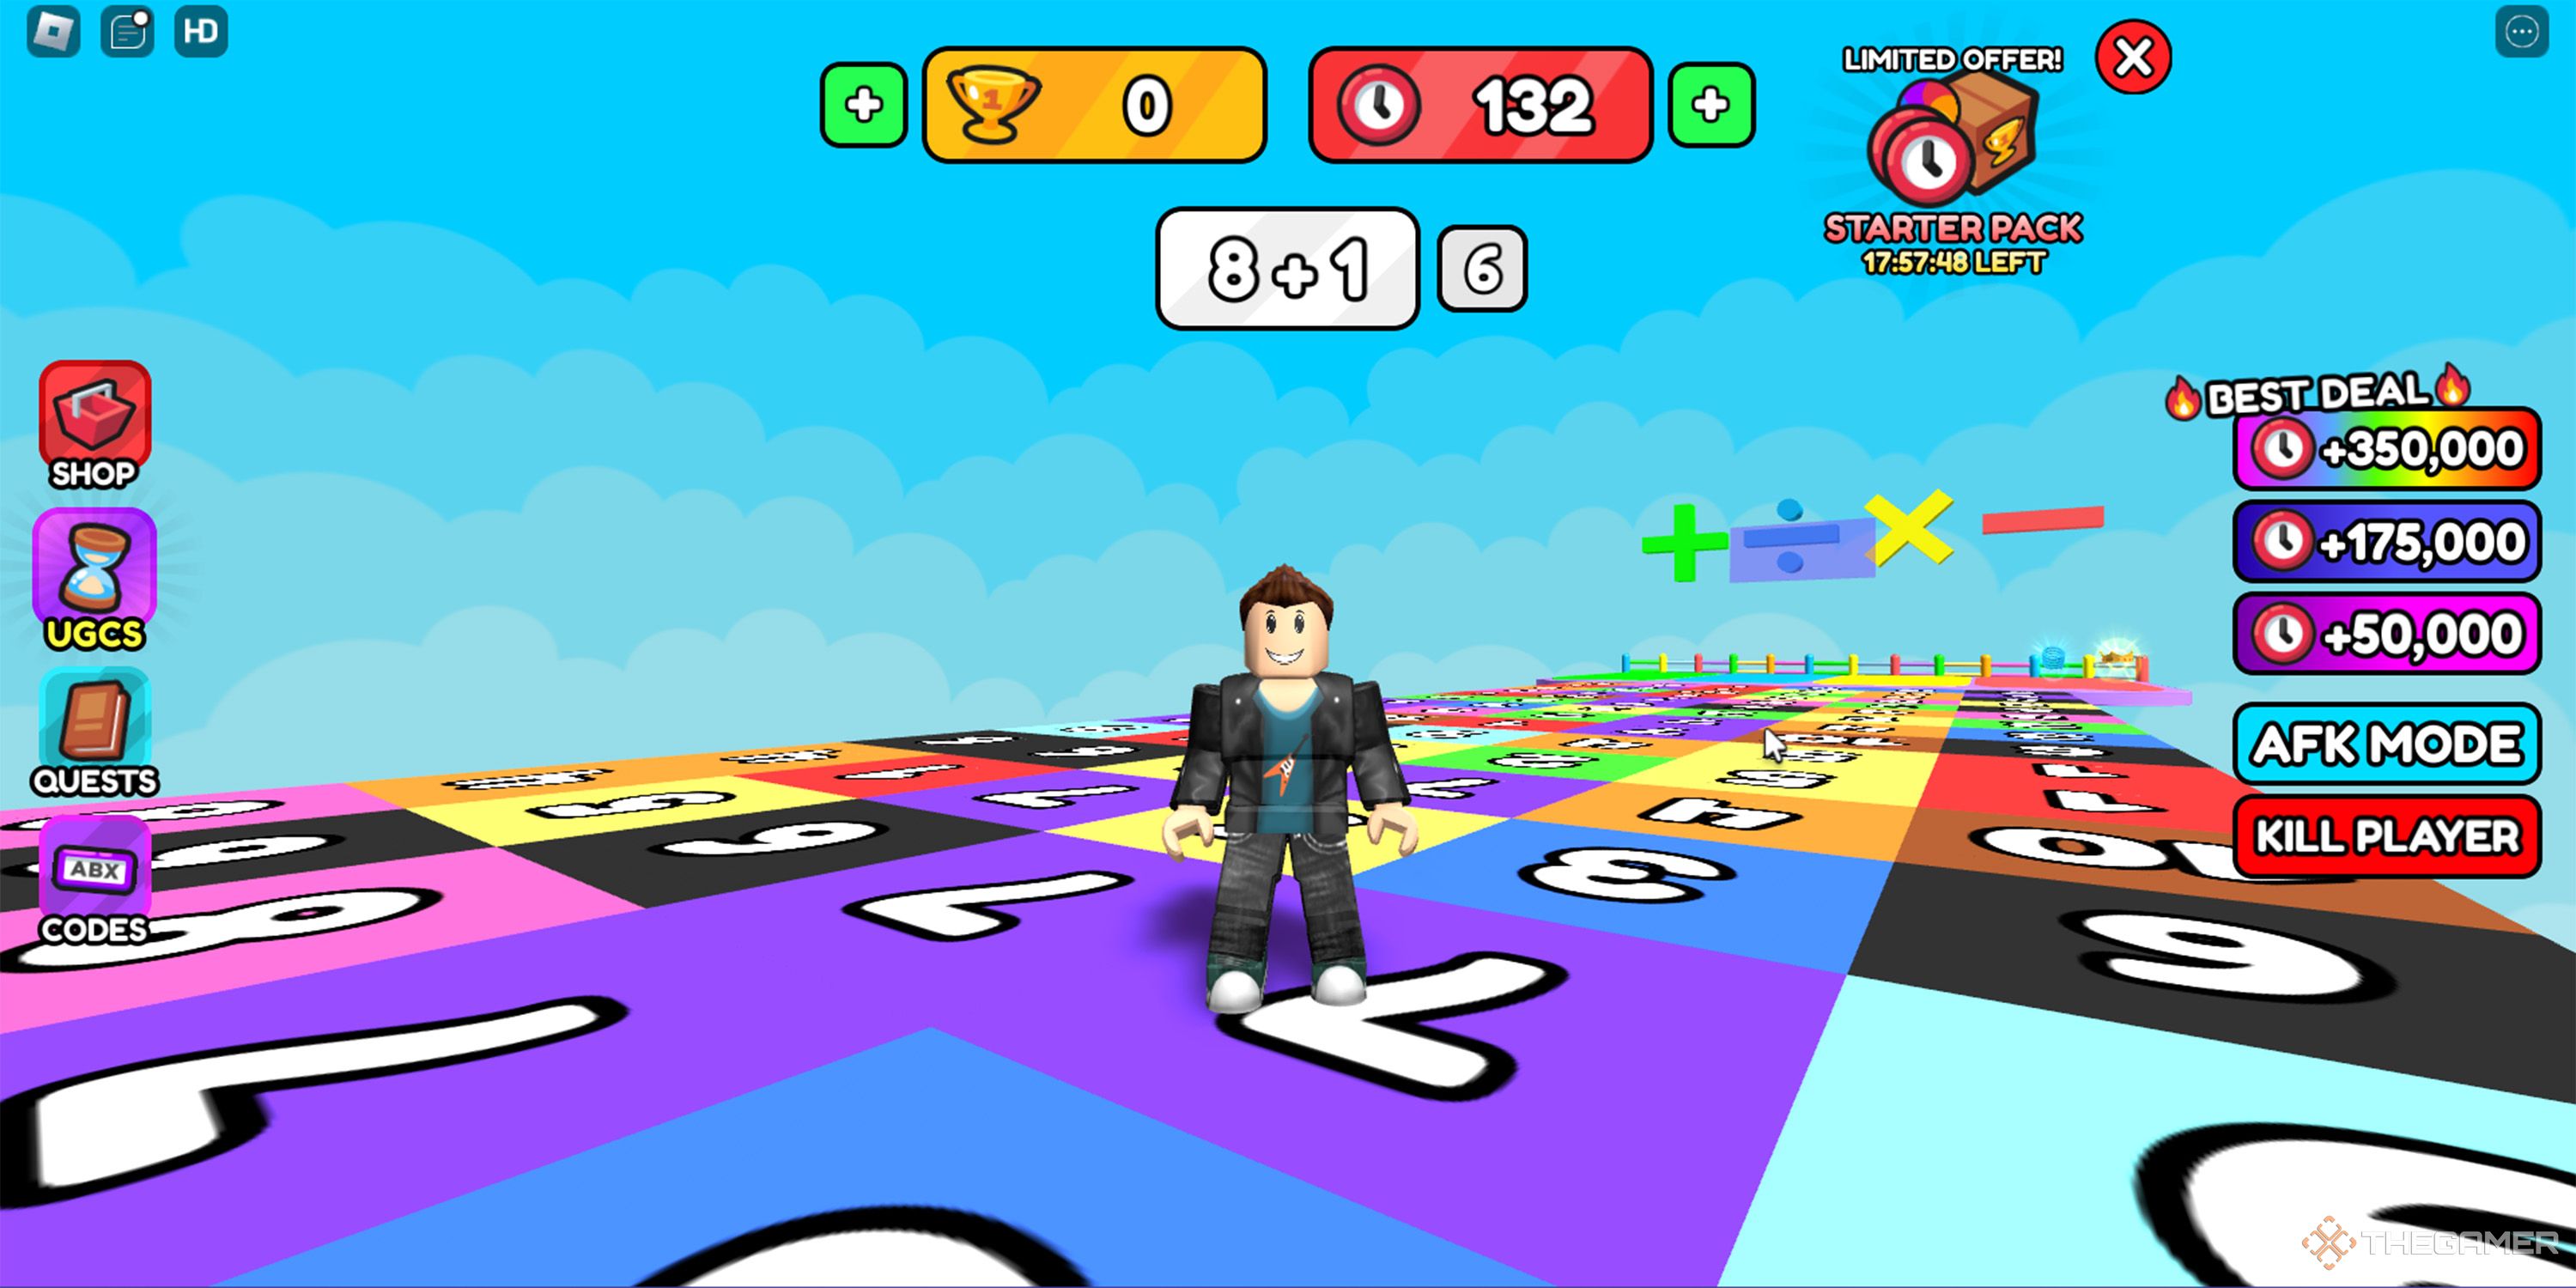 A Roblox character stands on a colorful platform with numbers on it in UGC Math Race.